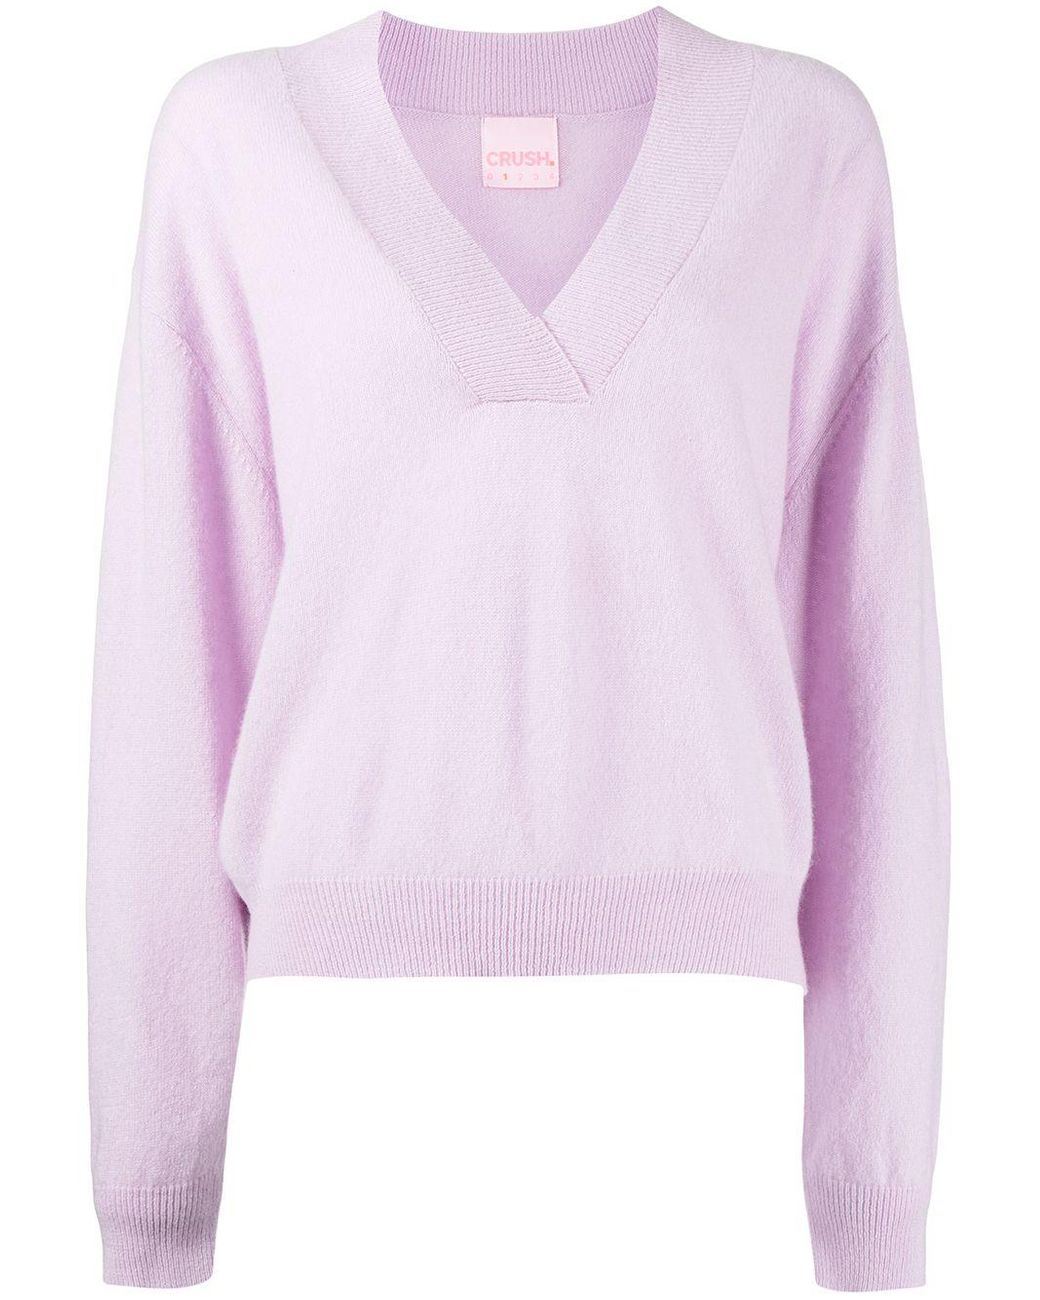 Crush Cashmere Malibu Jumper in Lilac Purple Womens Clothing Jumpers and knitwear Jumpers 